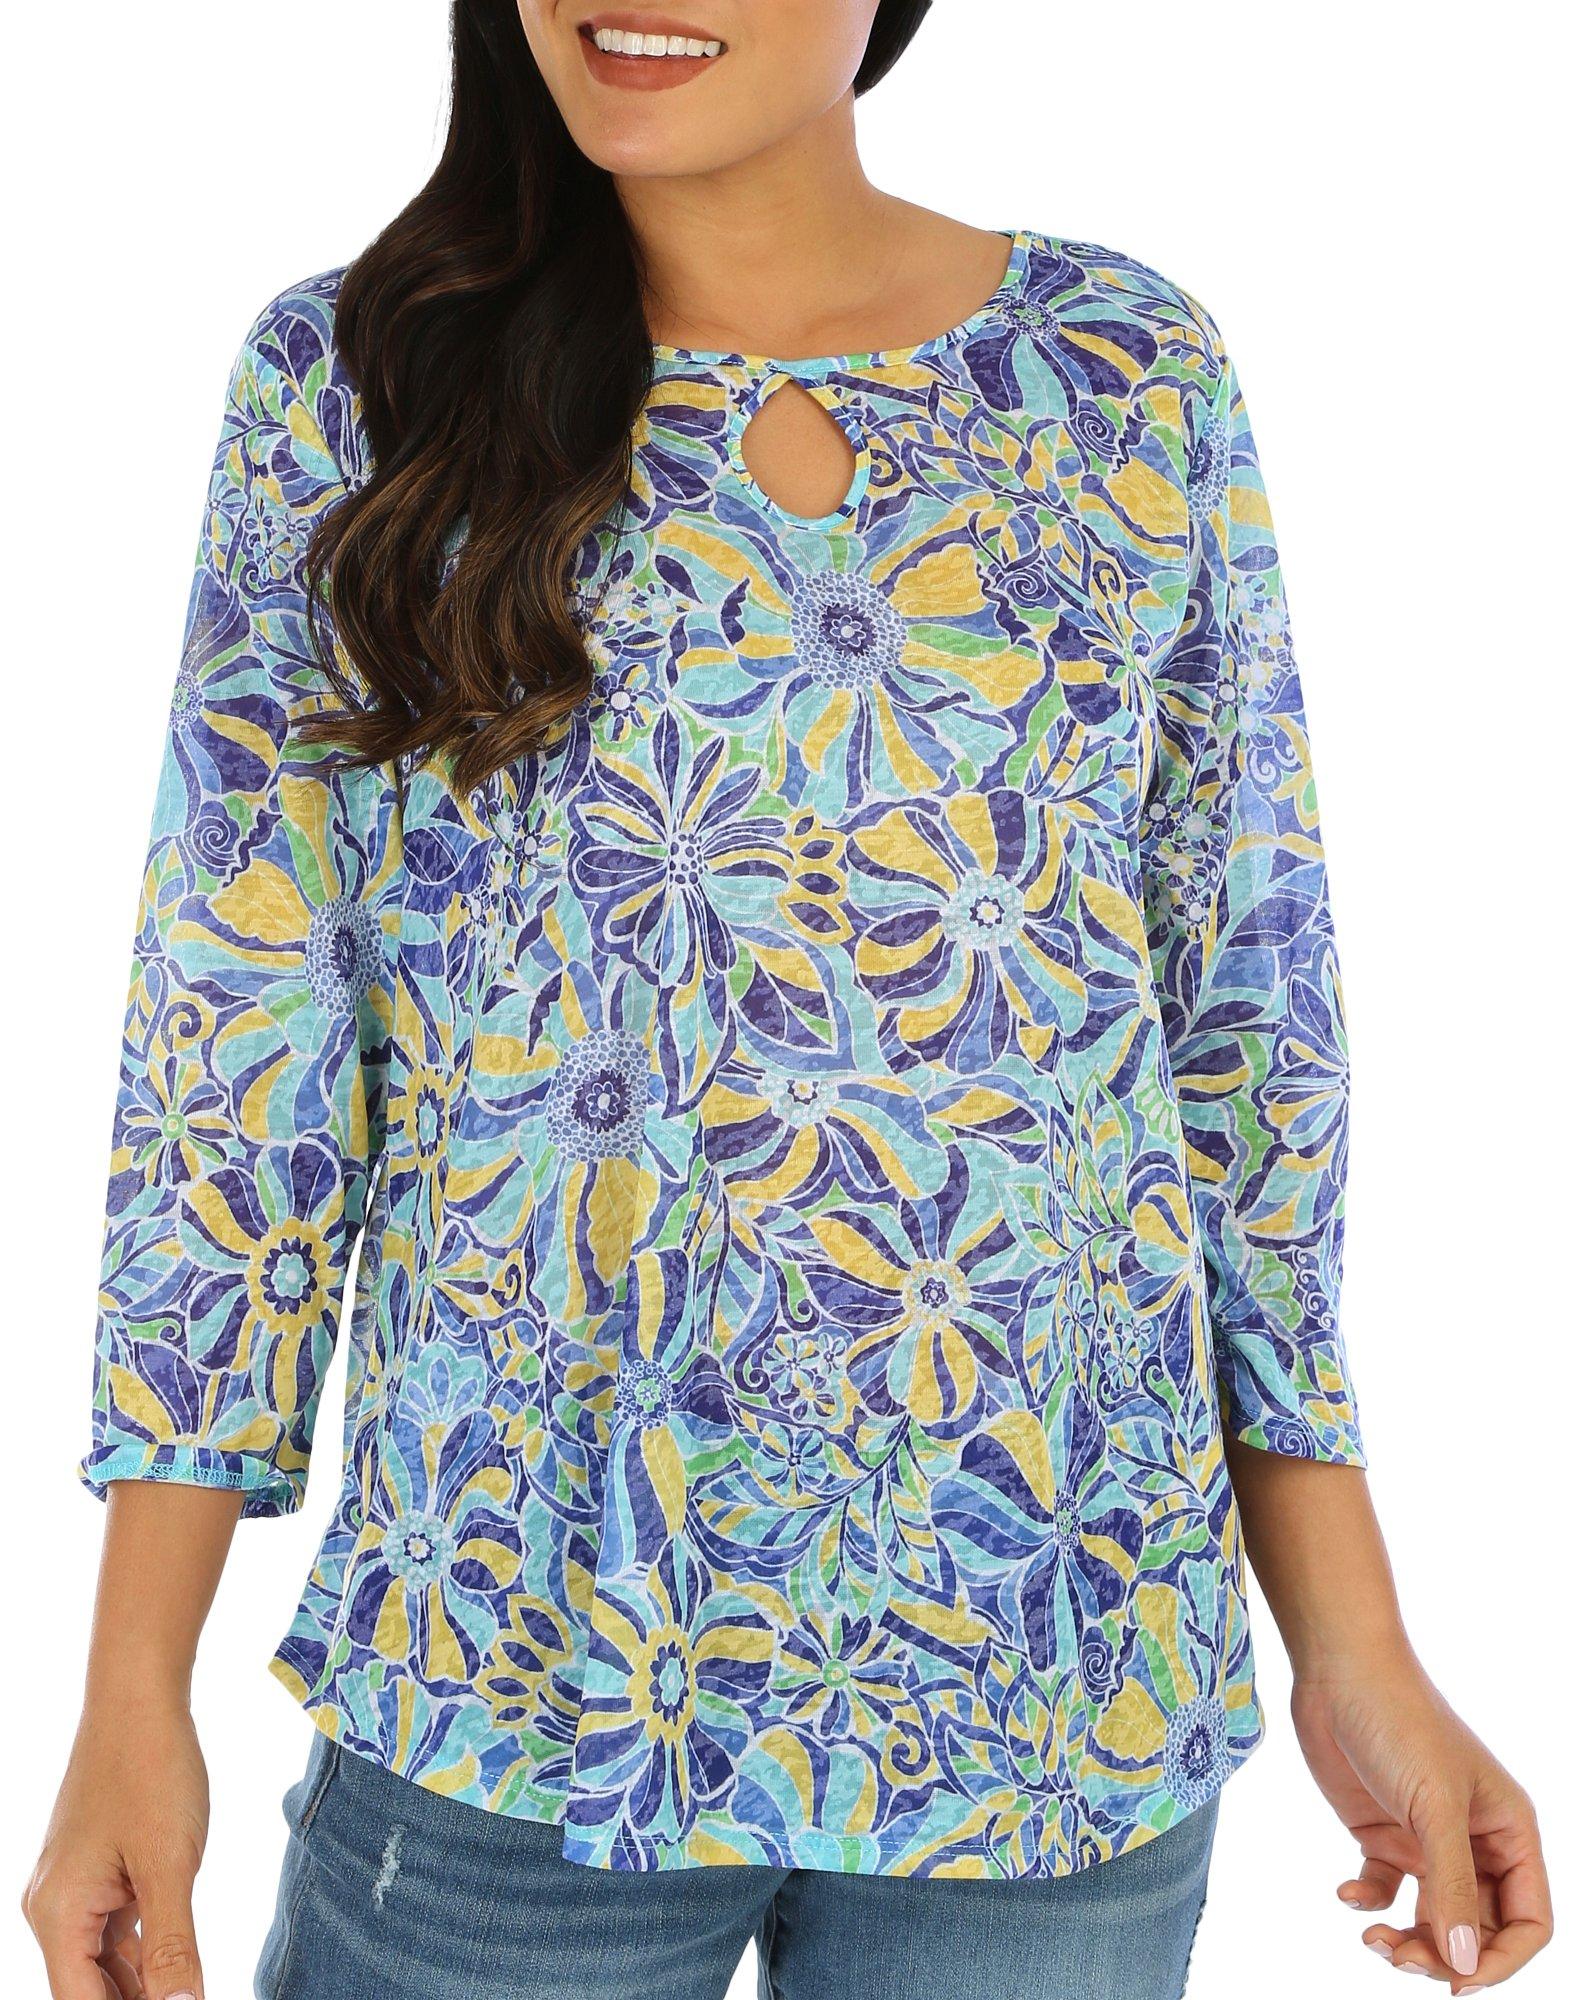 Ruby Road Womens Burnout Floral Keyhole 3/4 Sleeve Top